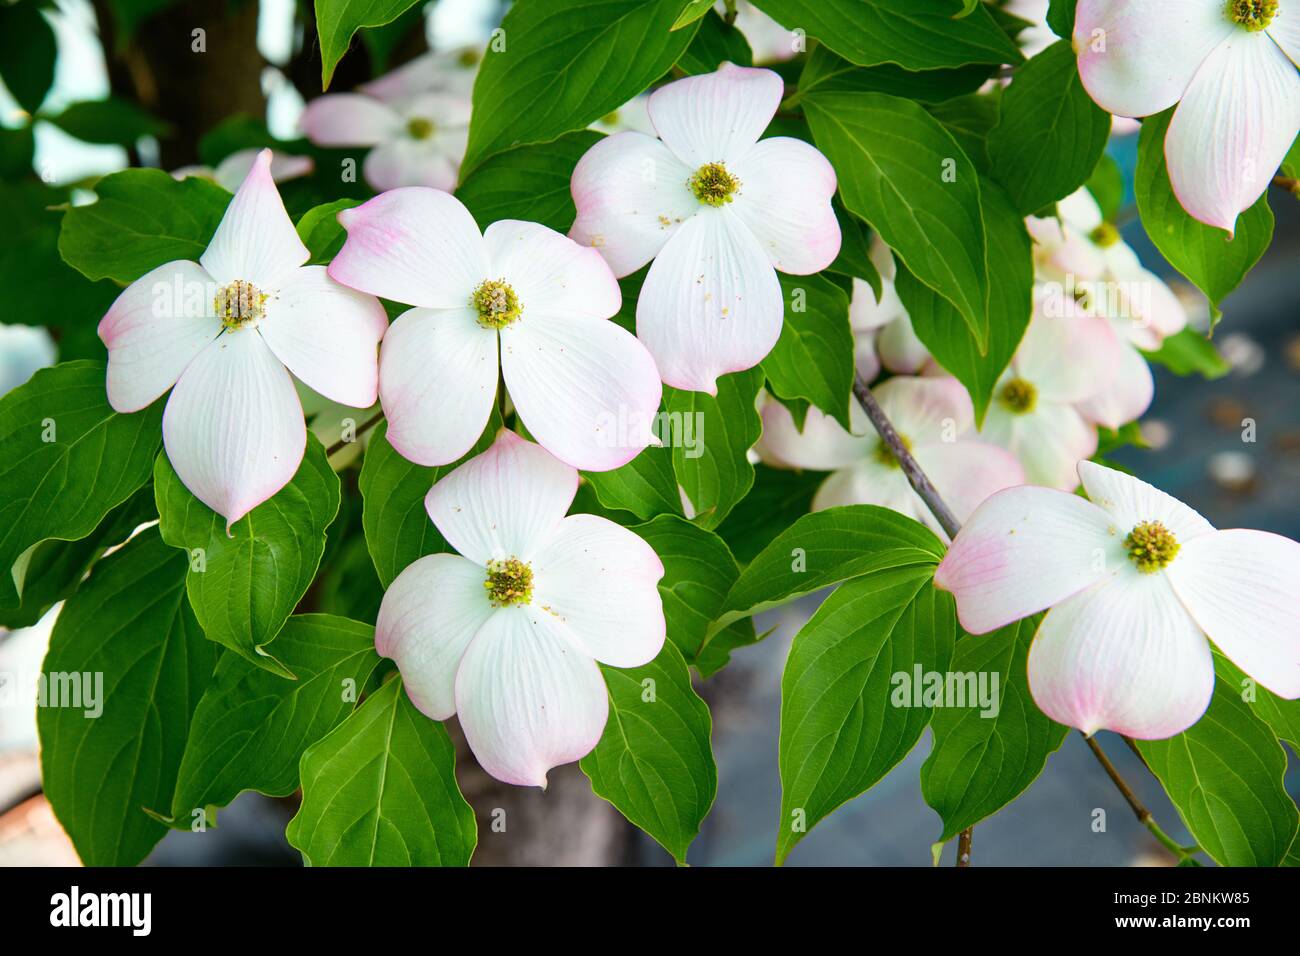 Close up of white Cornus kousa or Kousa Dogwood flowers tinged with delicate pink growing on the tree amidst fresh green leaves in spring Stock Photo